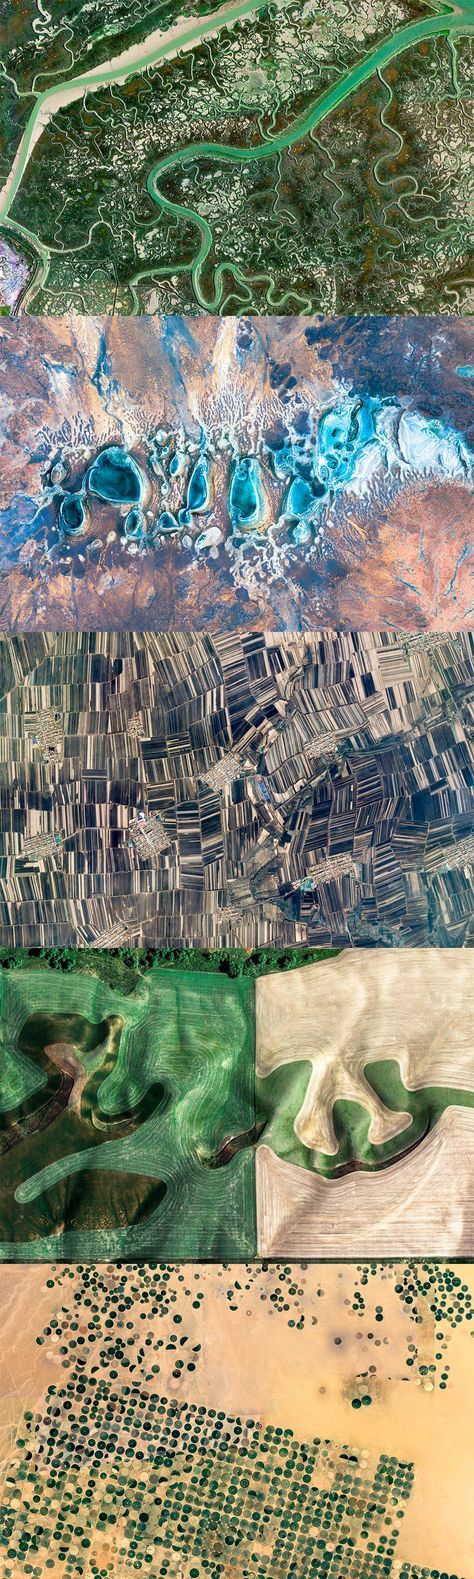 Earth View: A Curated Selection of the Most Striking Satellite Images Found on Google Earth